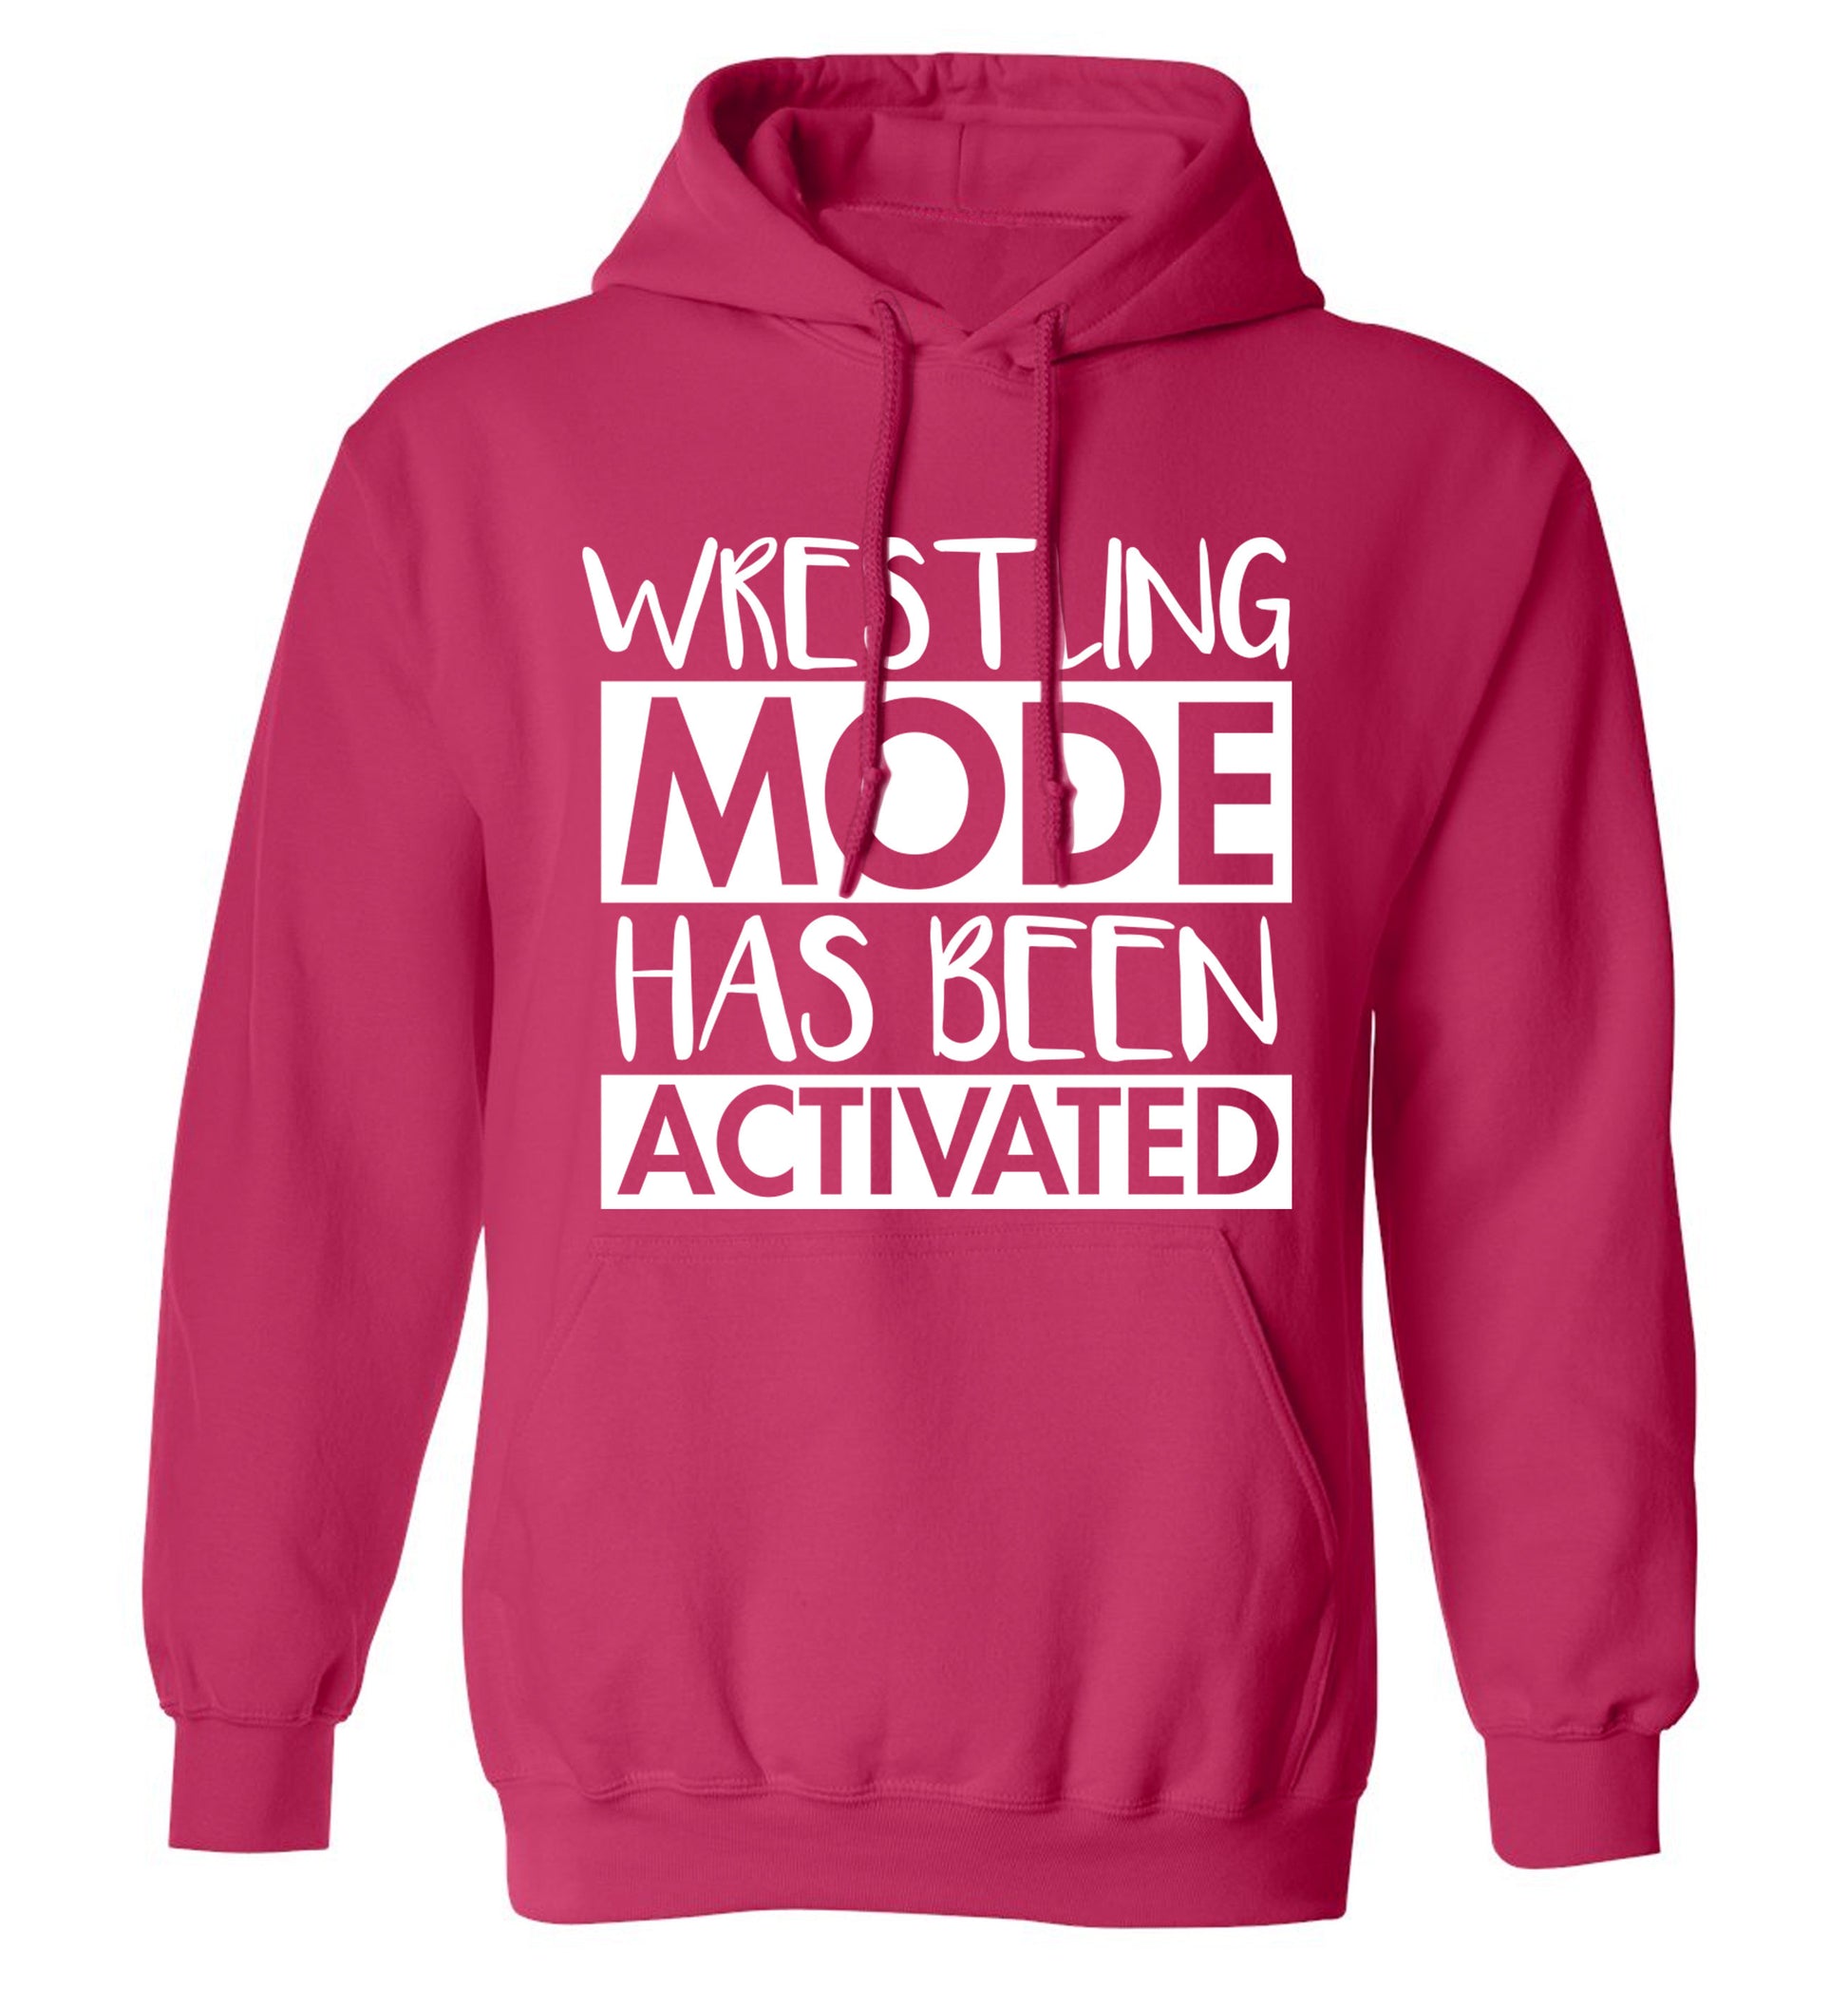 Wresting mode activated adults unisex pink hoodie 2XL